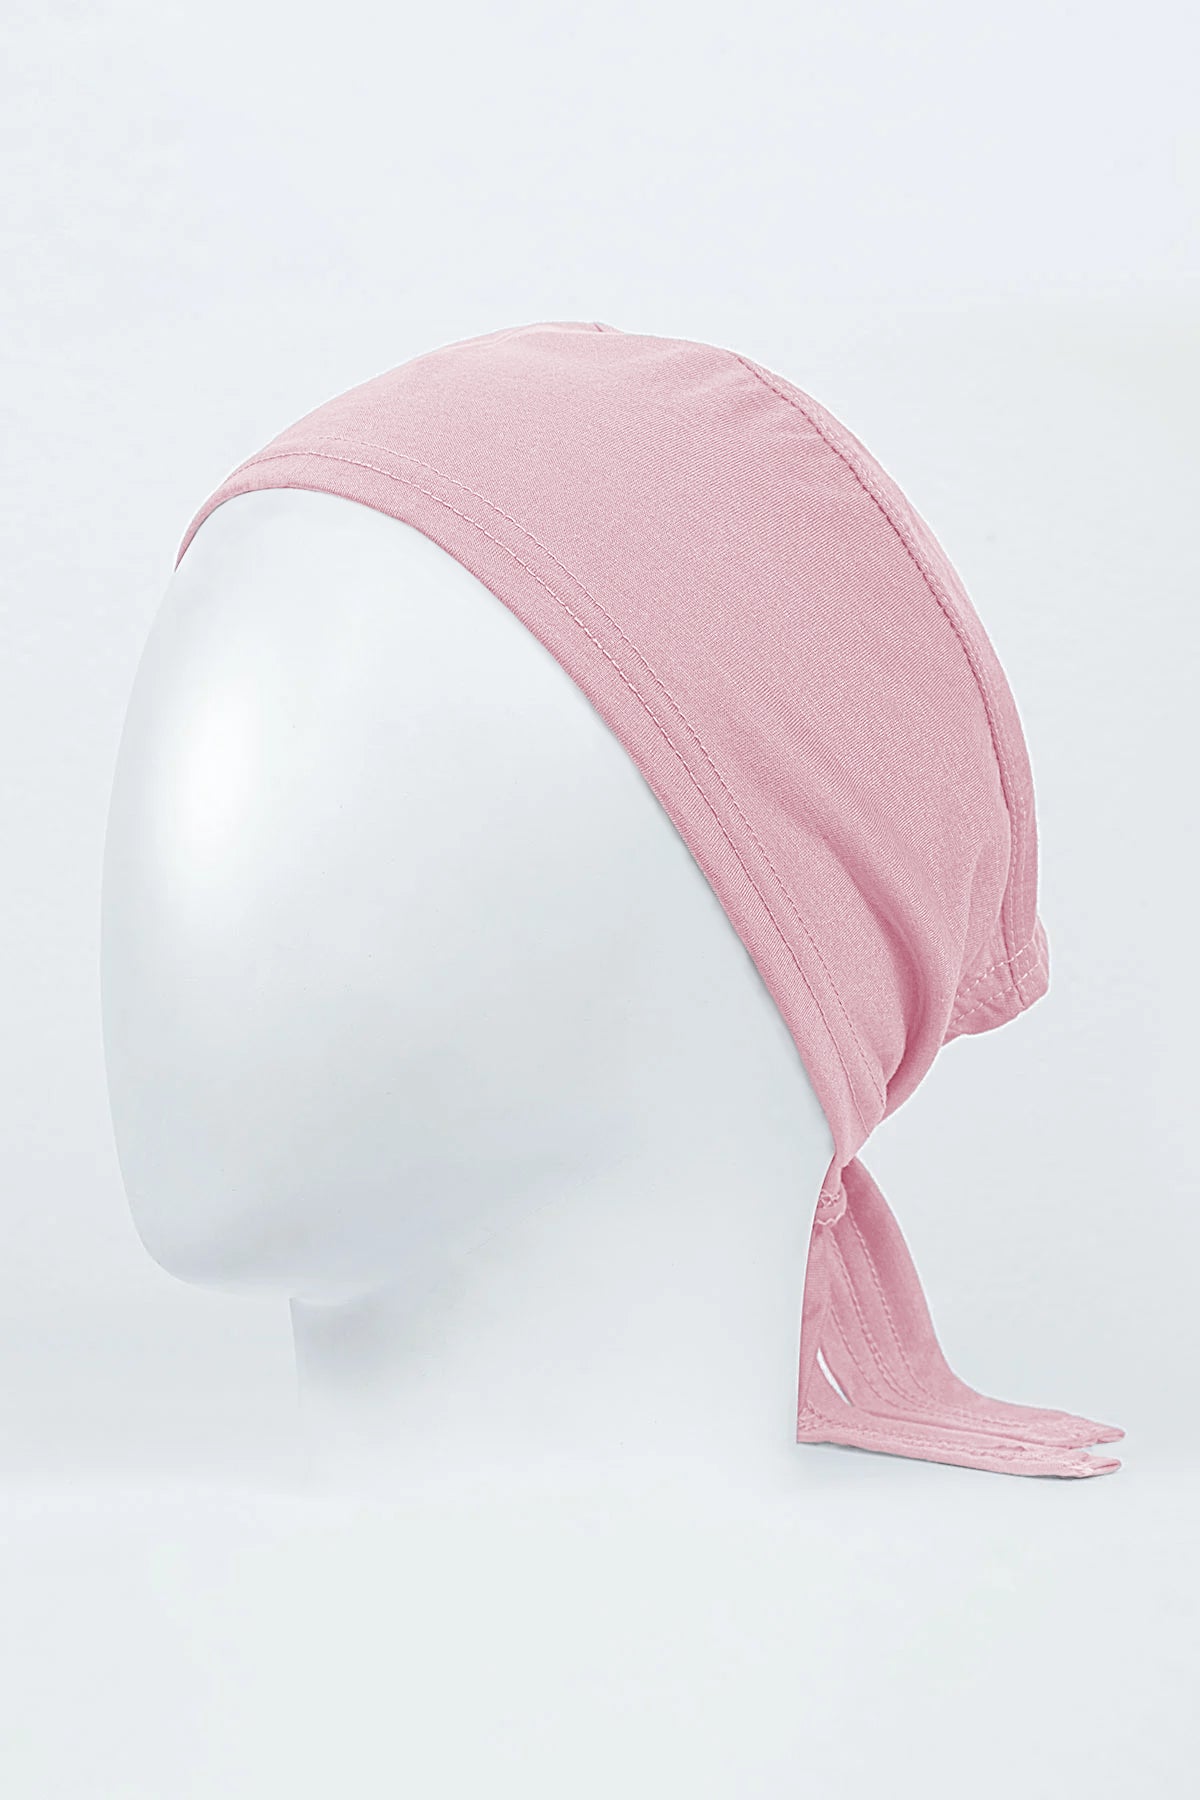 hijab inner cap in pink colour